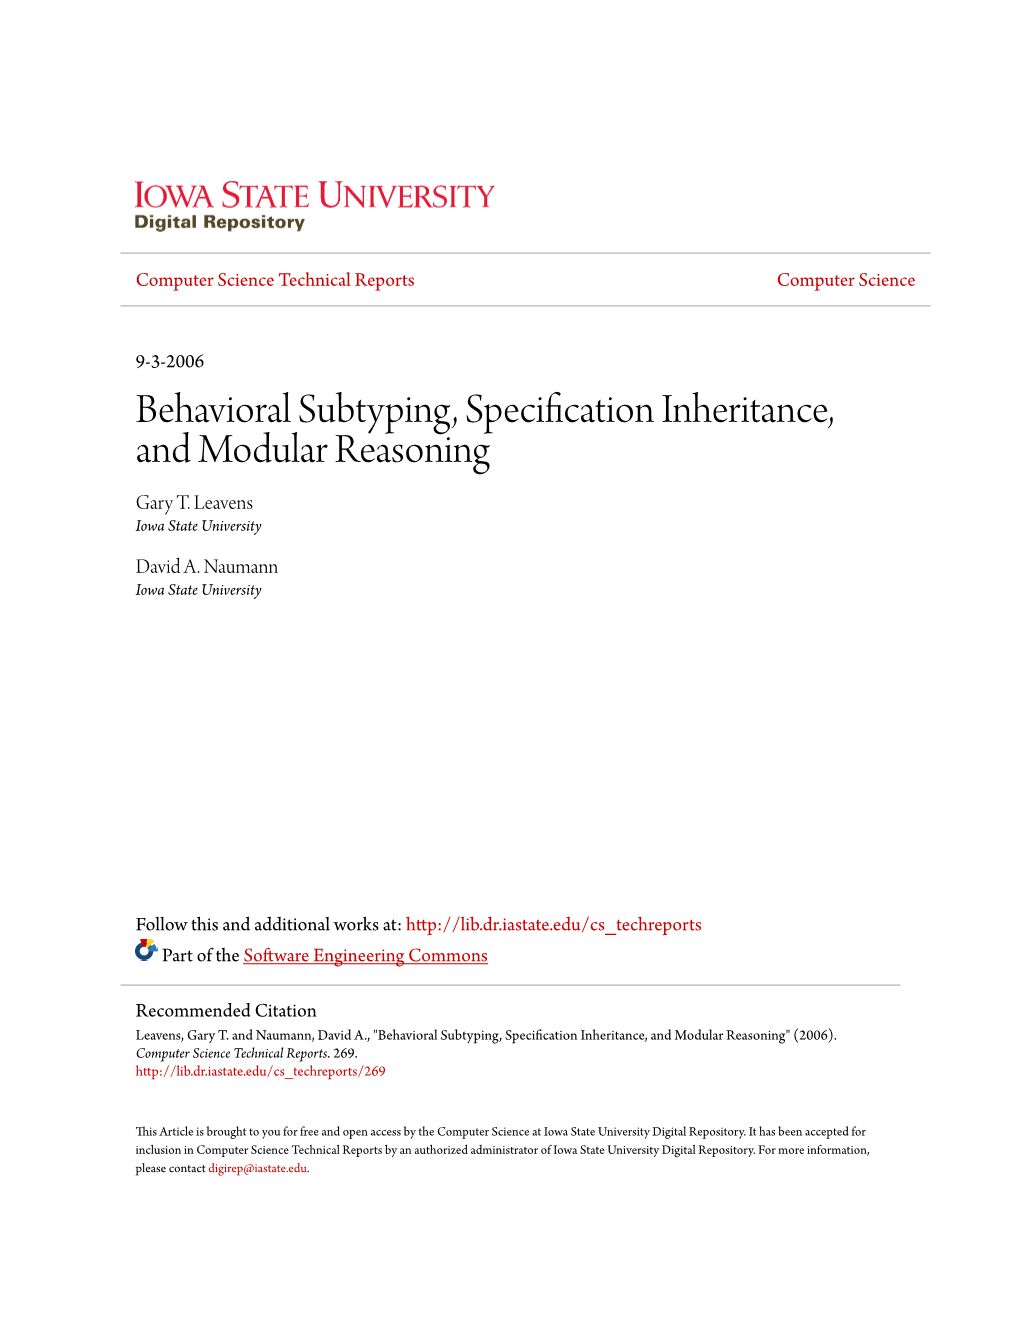 Behavioral Subtyping, Specification Inheritance, and Modular Reasoning Gary T